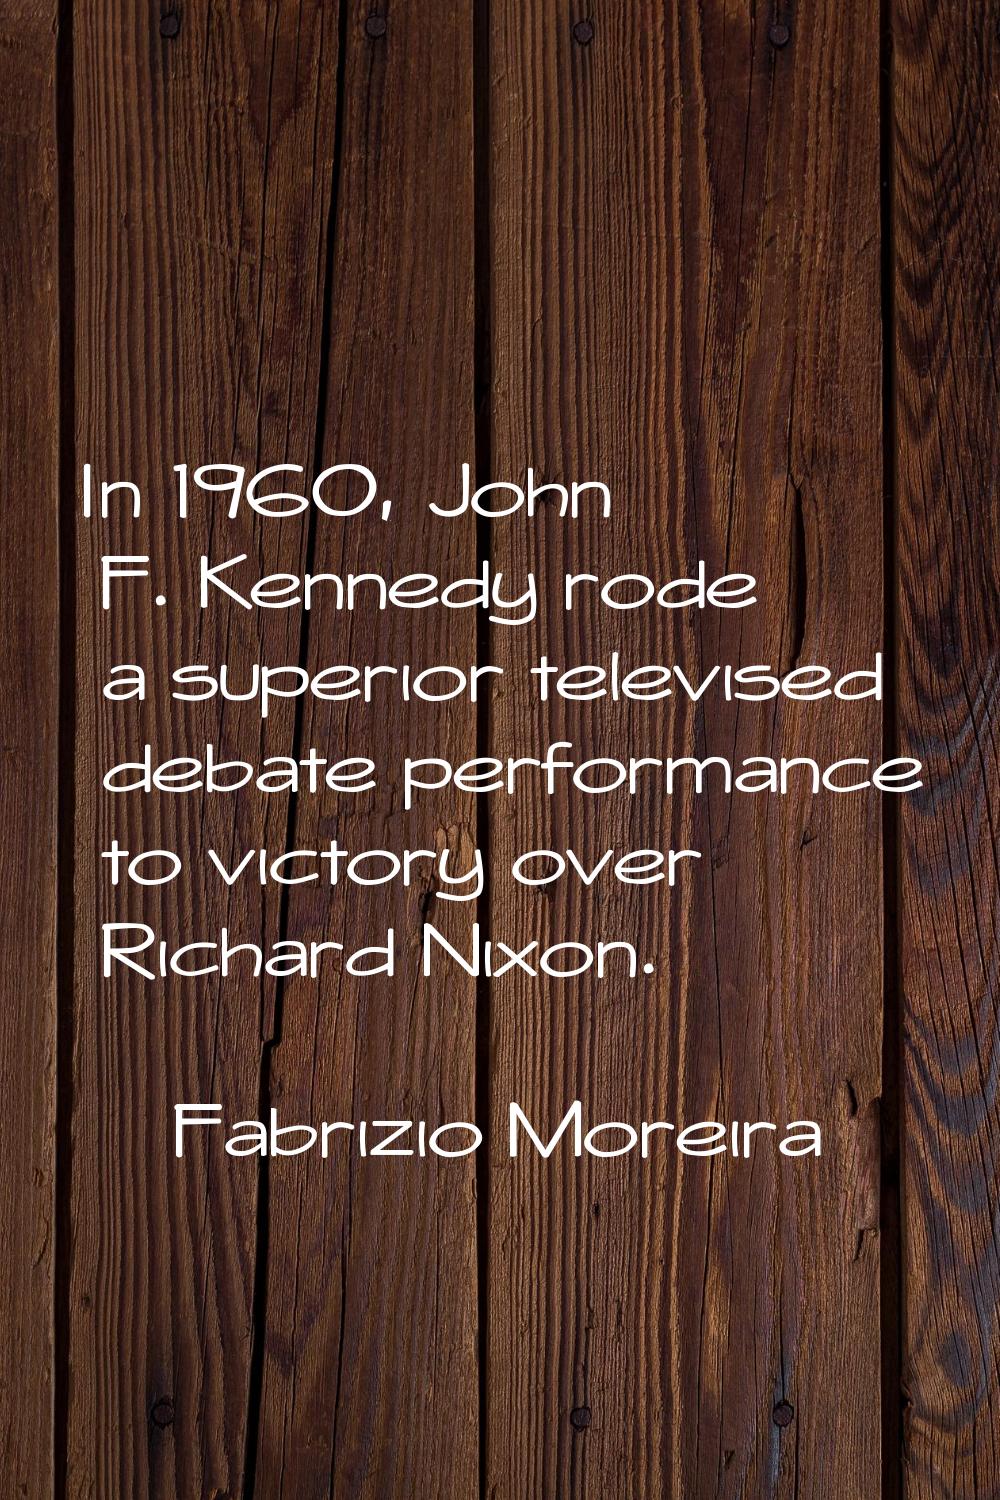 In 1960, John F. Kennedy rode a superior televised debate performance to victory over Richard Nixon